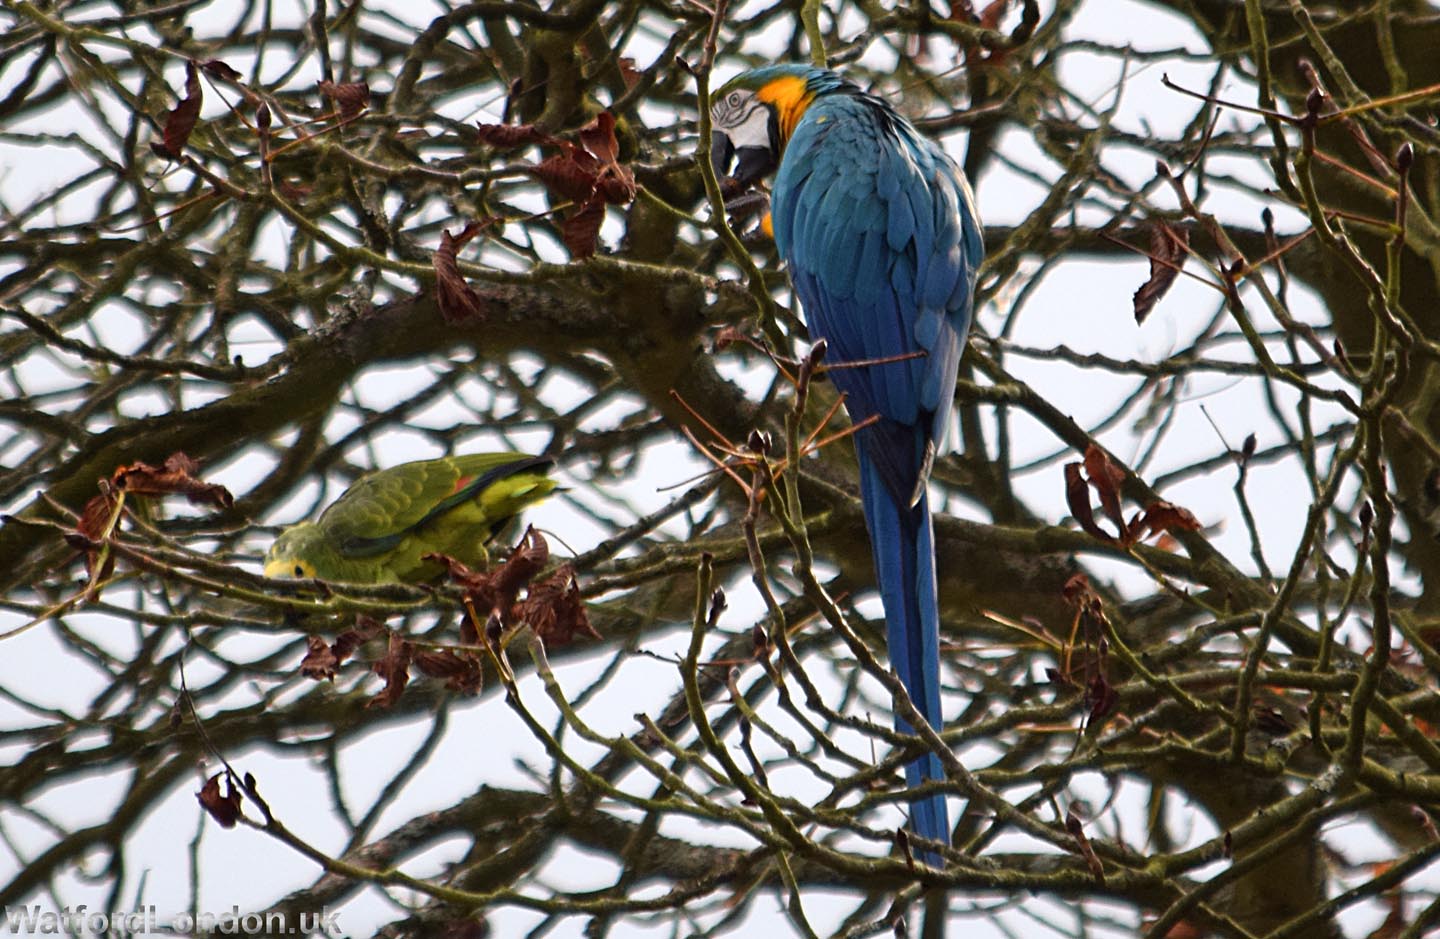 Large Parrots seen again in Local Park